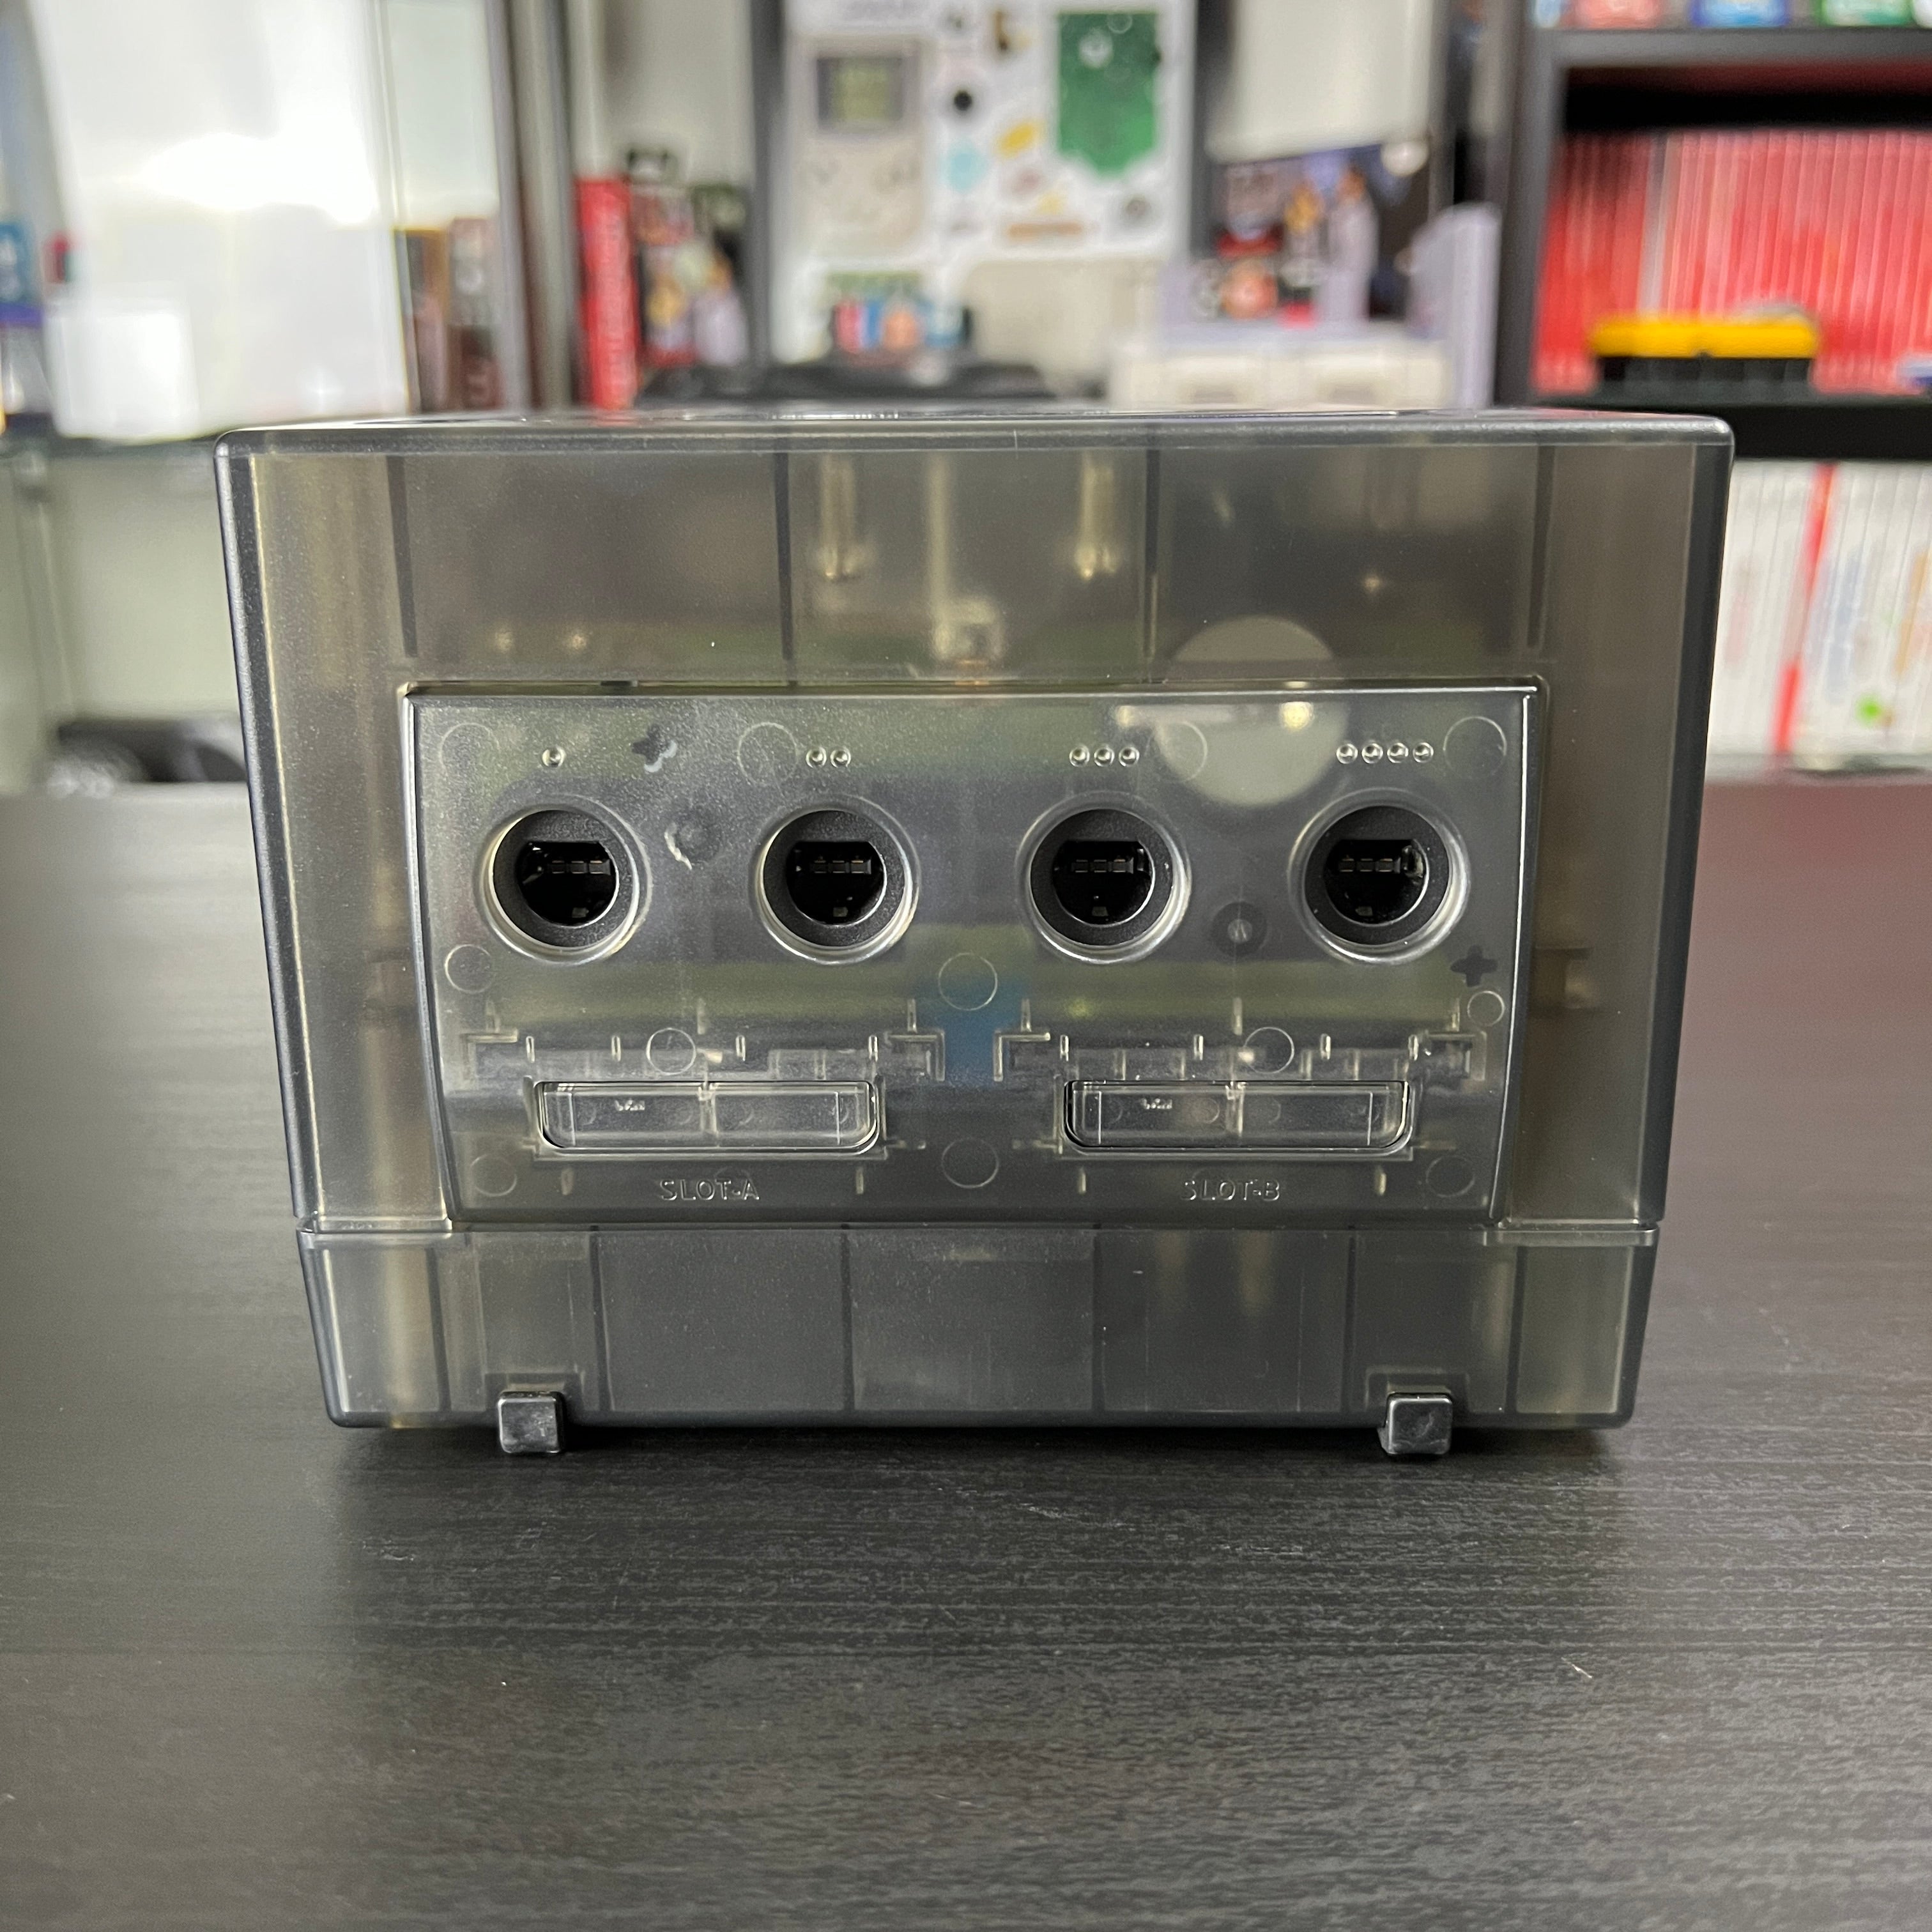 Clear Black Modded GameCube (New Shell DOL-001)